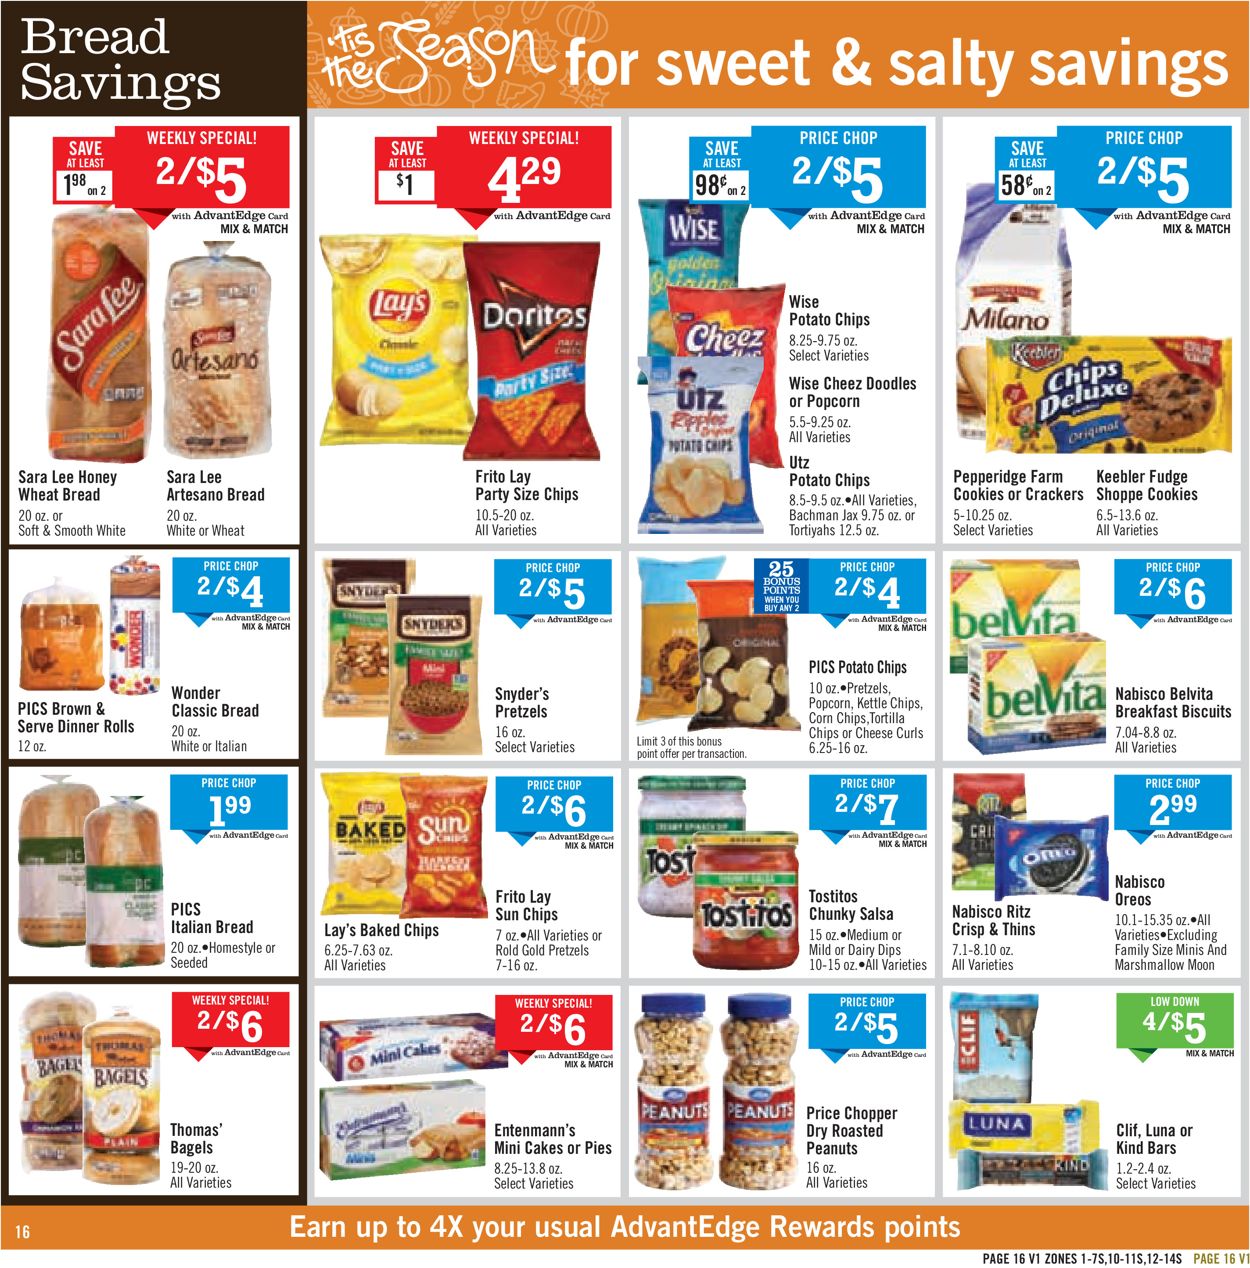 Price Chopper - Thanksgiving Ad 2019 Weekly Ad Circular - valid 11/24-11/30/2019 (Page 20)